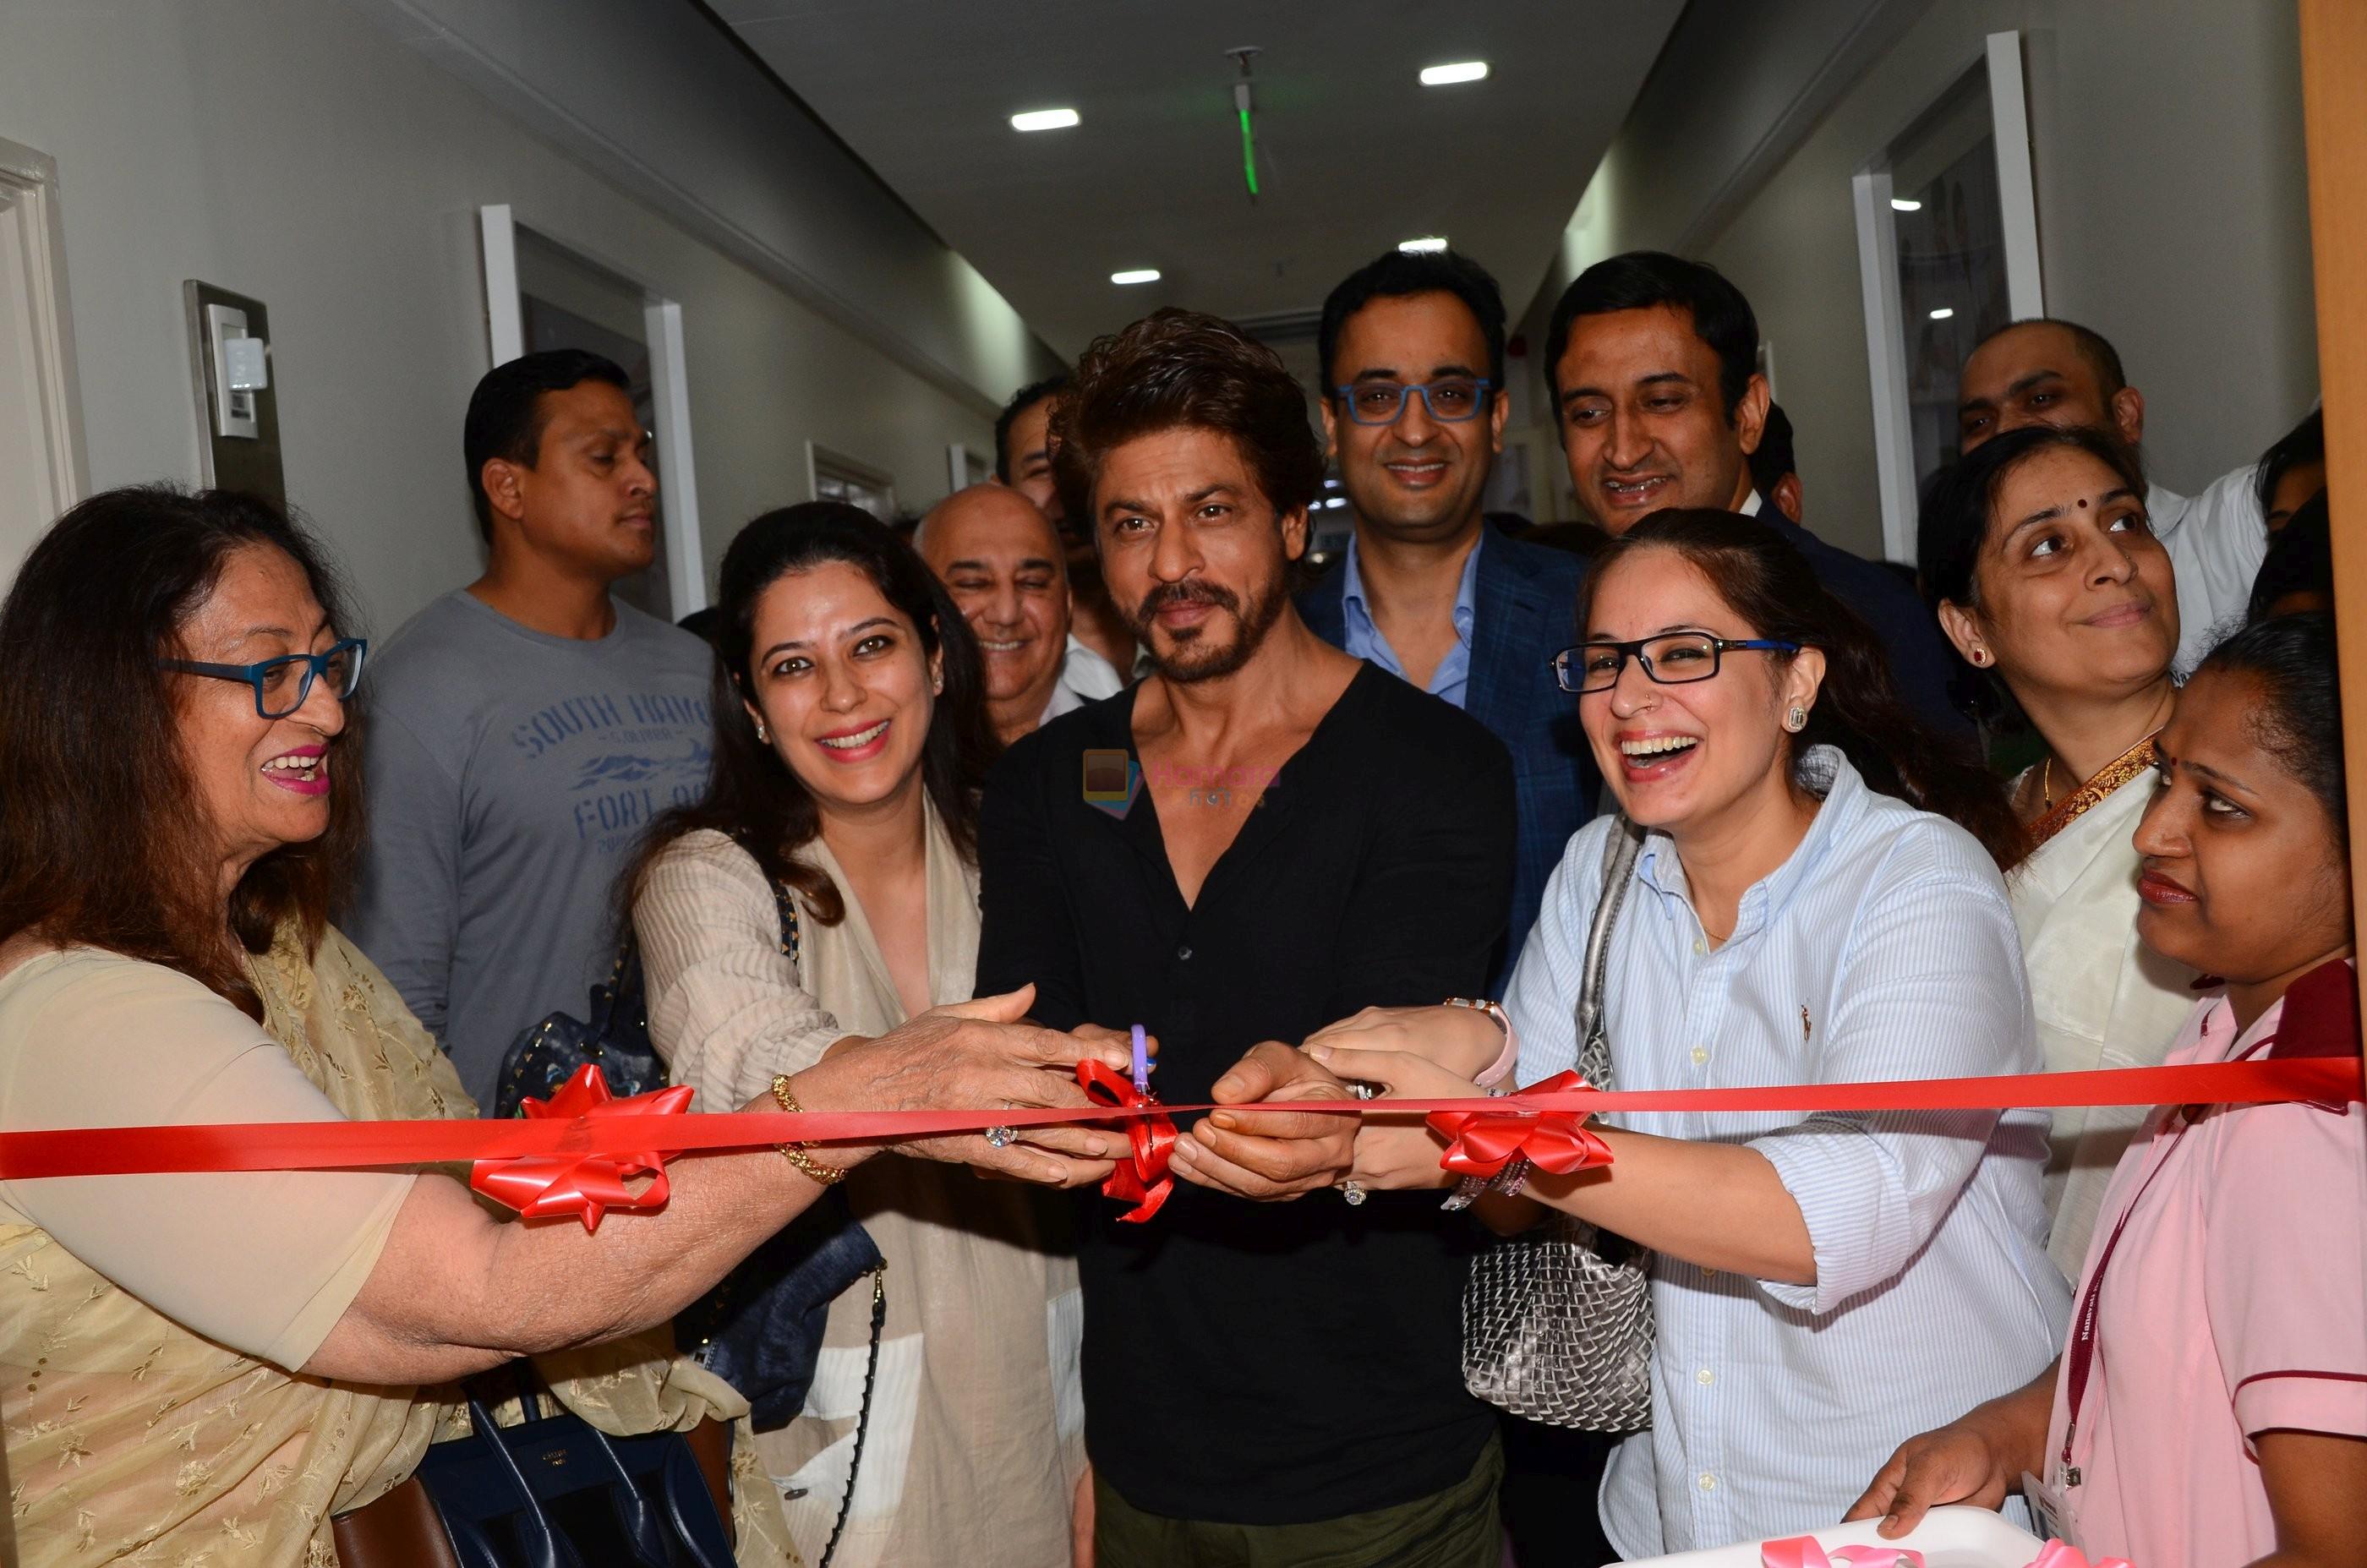 Shah Rukh Khan Launches Bone Marrow Transplant Centre & Birthing Centre at Nanavati Super Speciality Hospital with Chairman and M.D. Abhay Soi and family